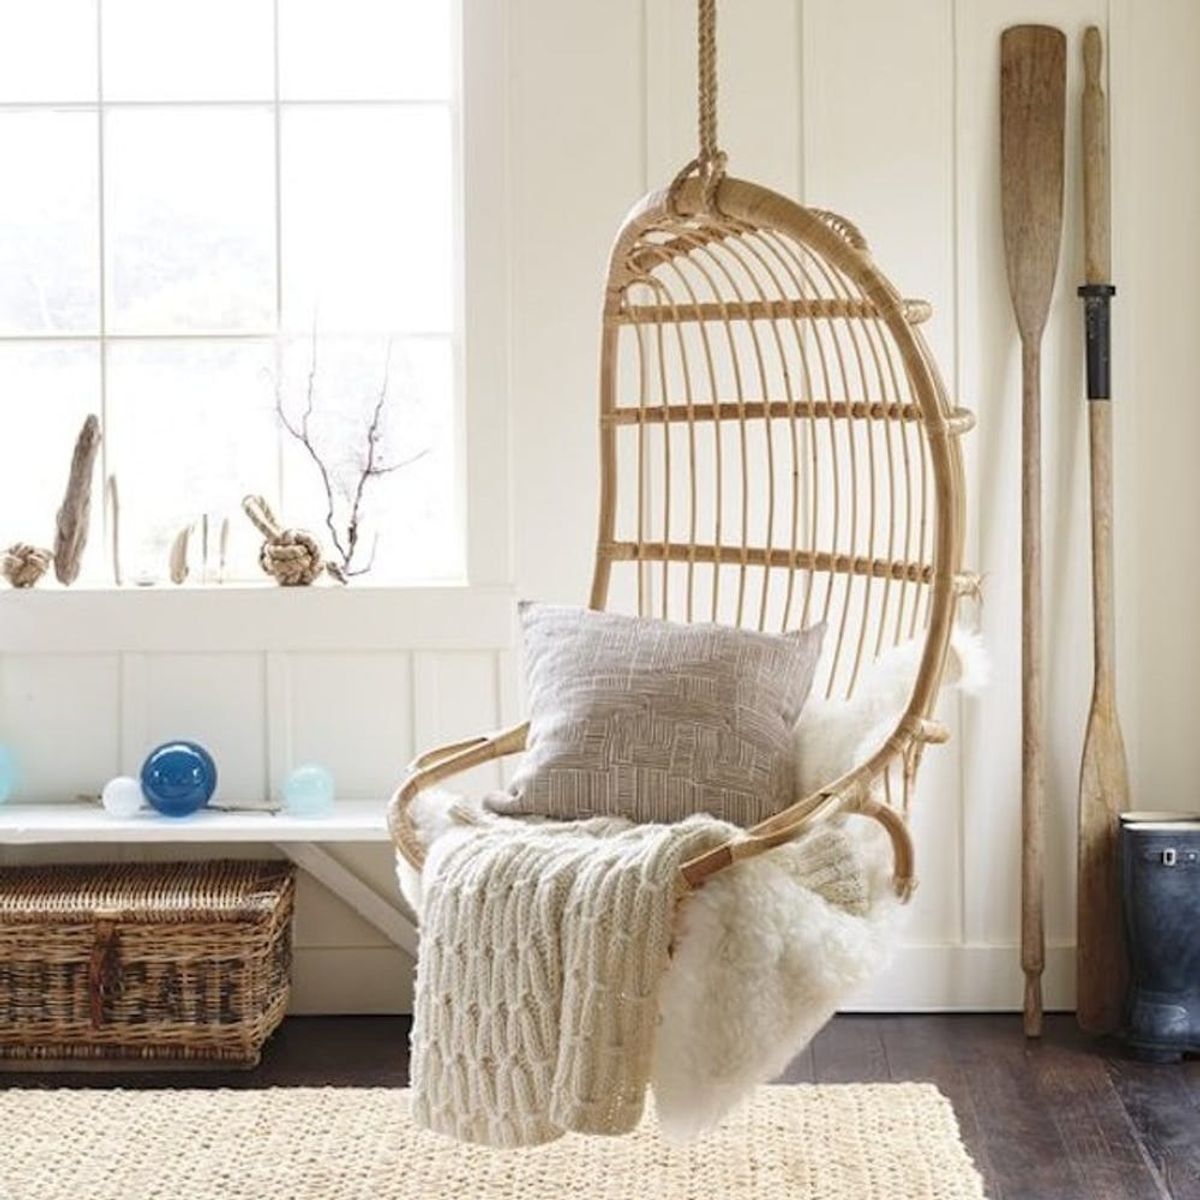 13 Seating Solutions for Small Space Living